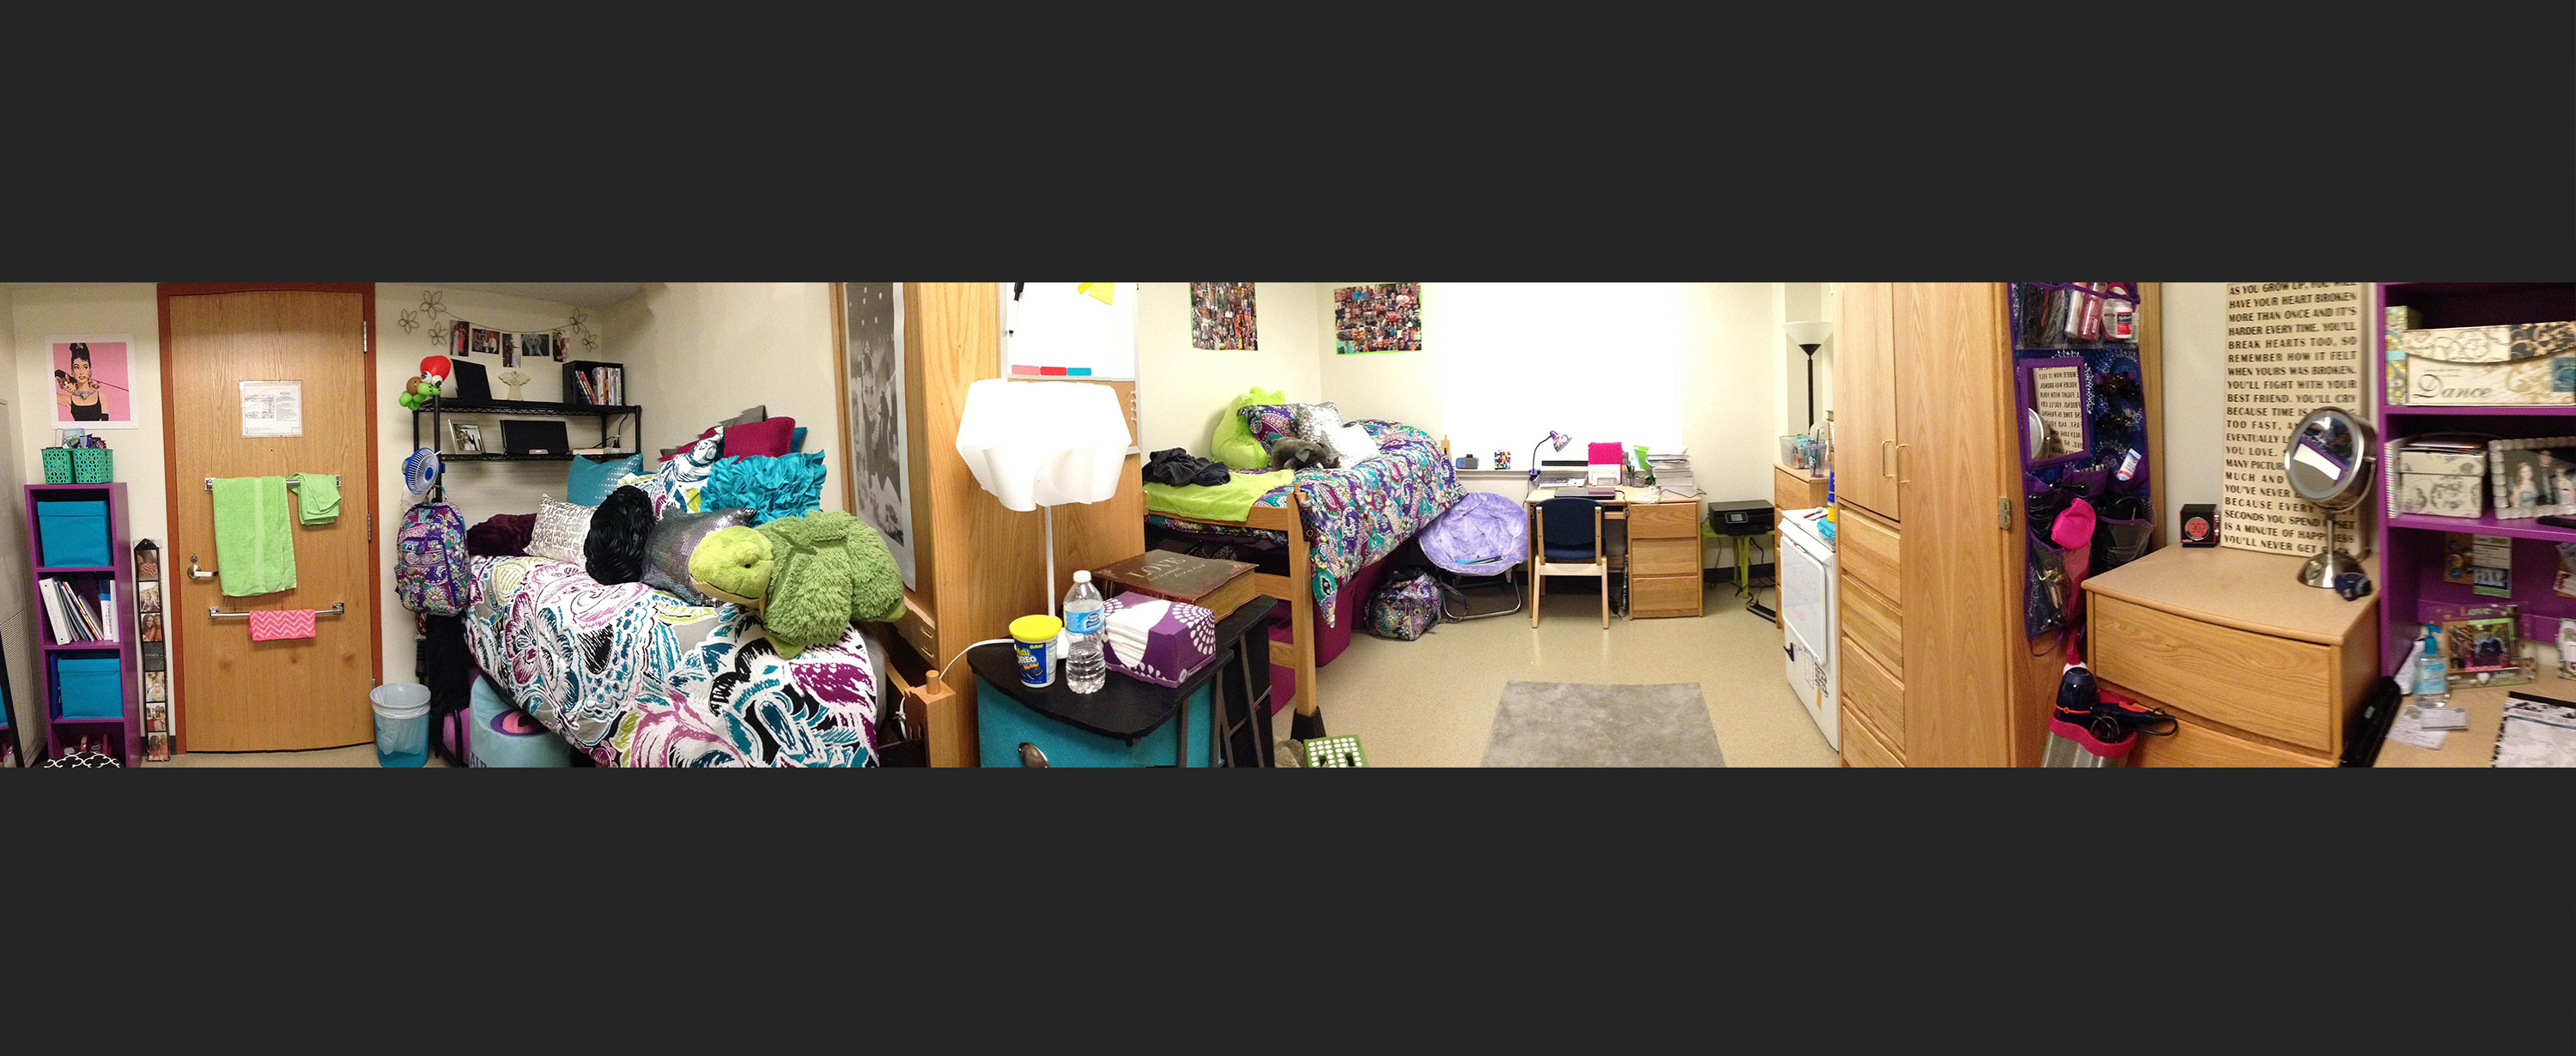 Panorama of a double room, nicely furnished and decorated